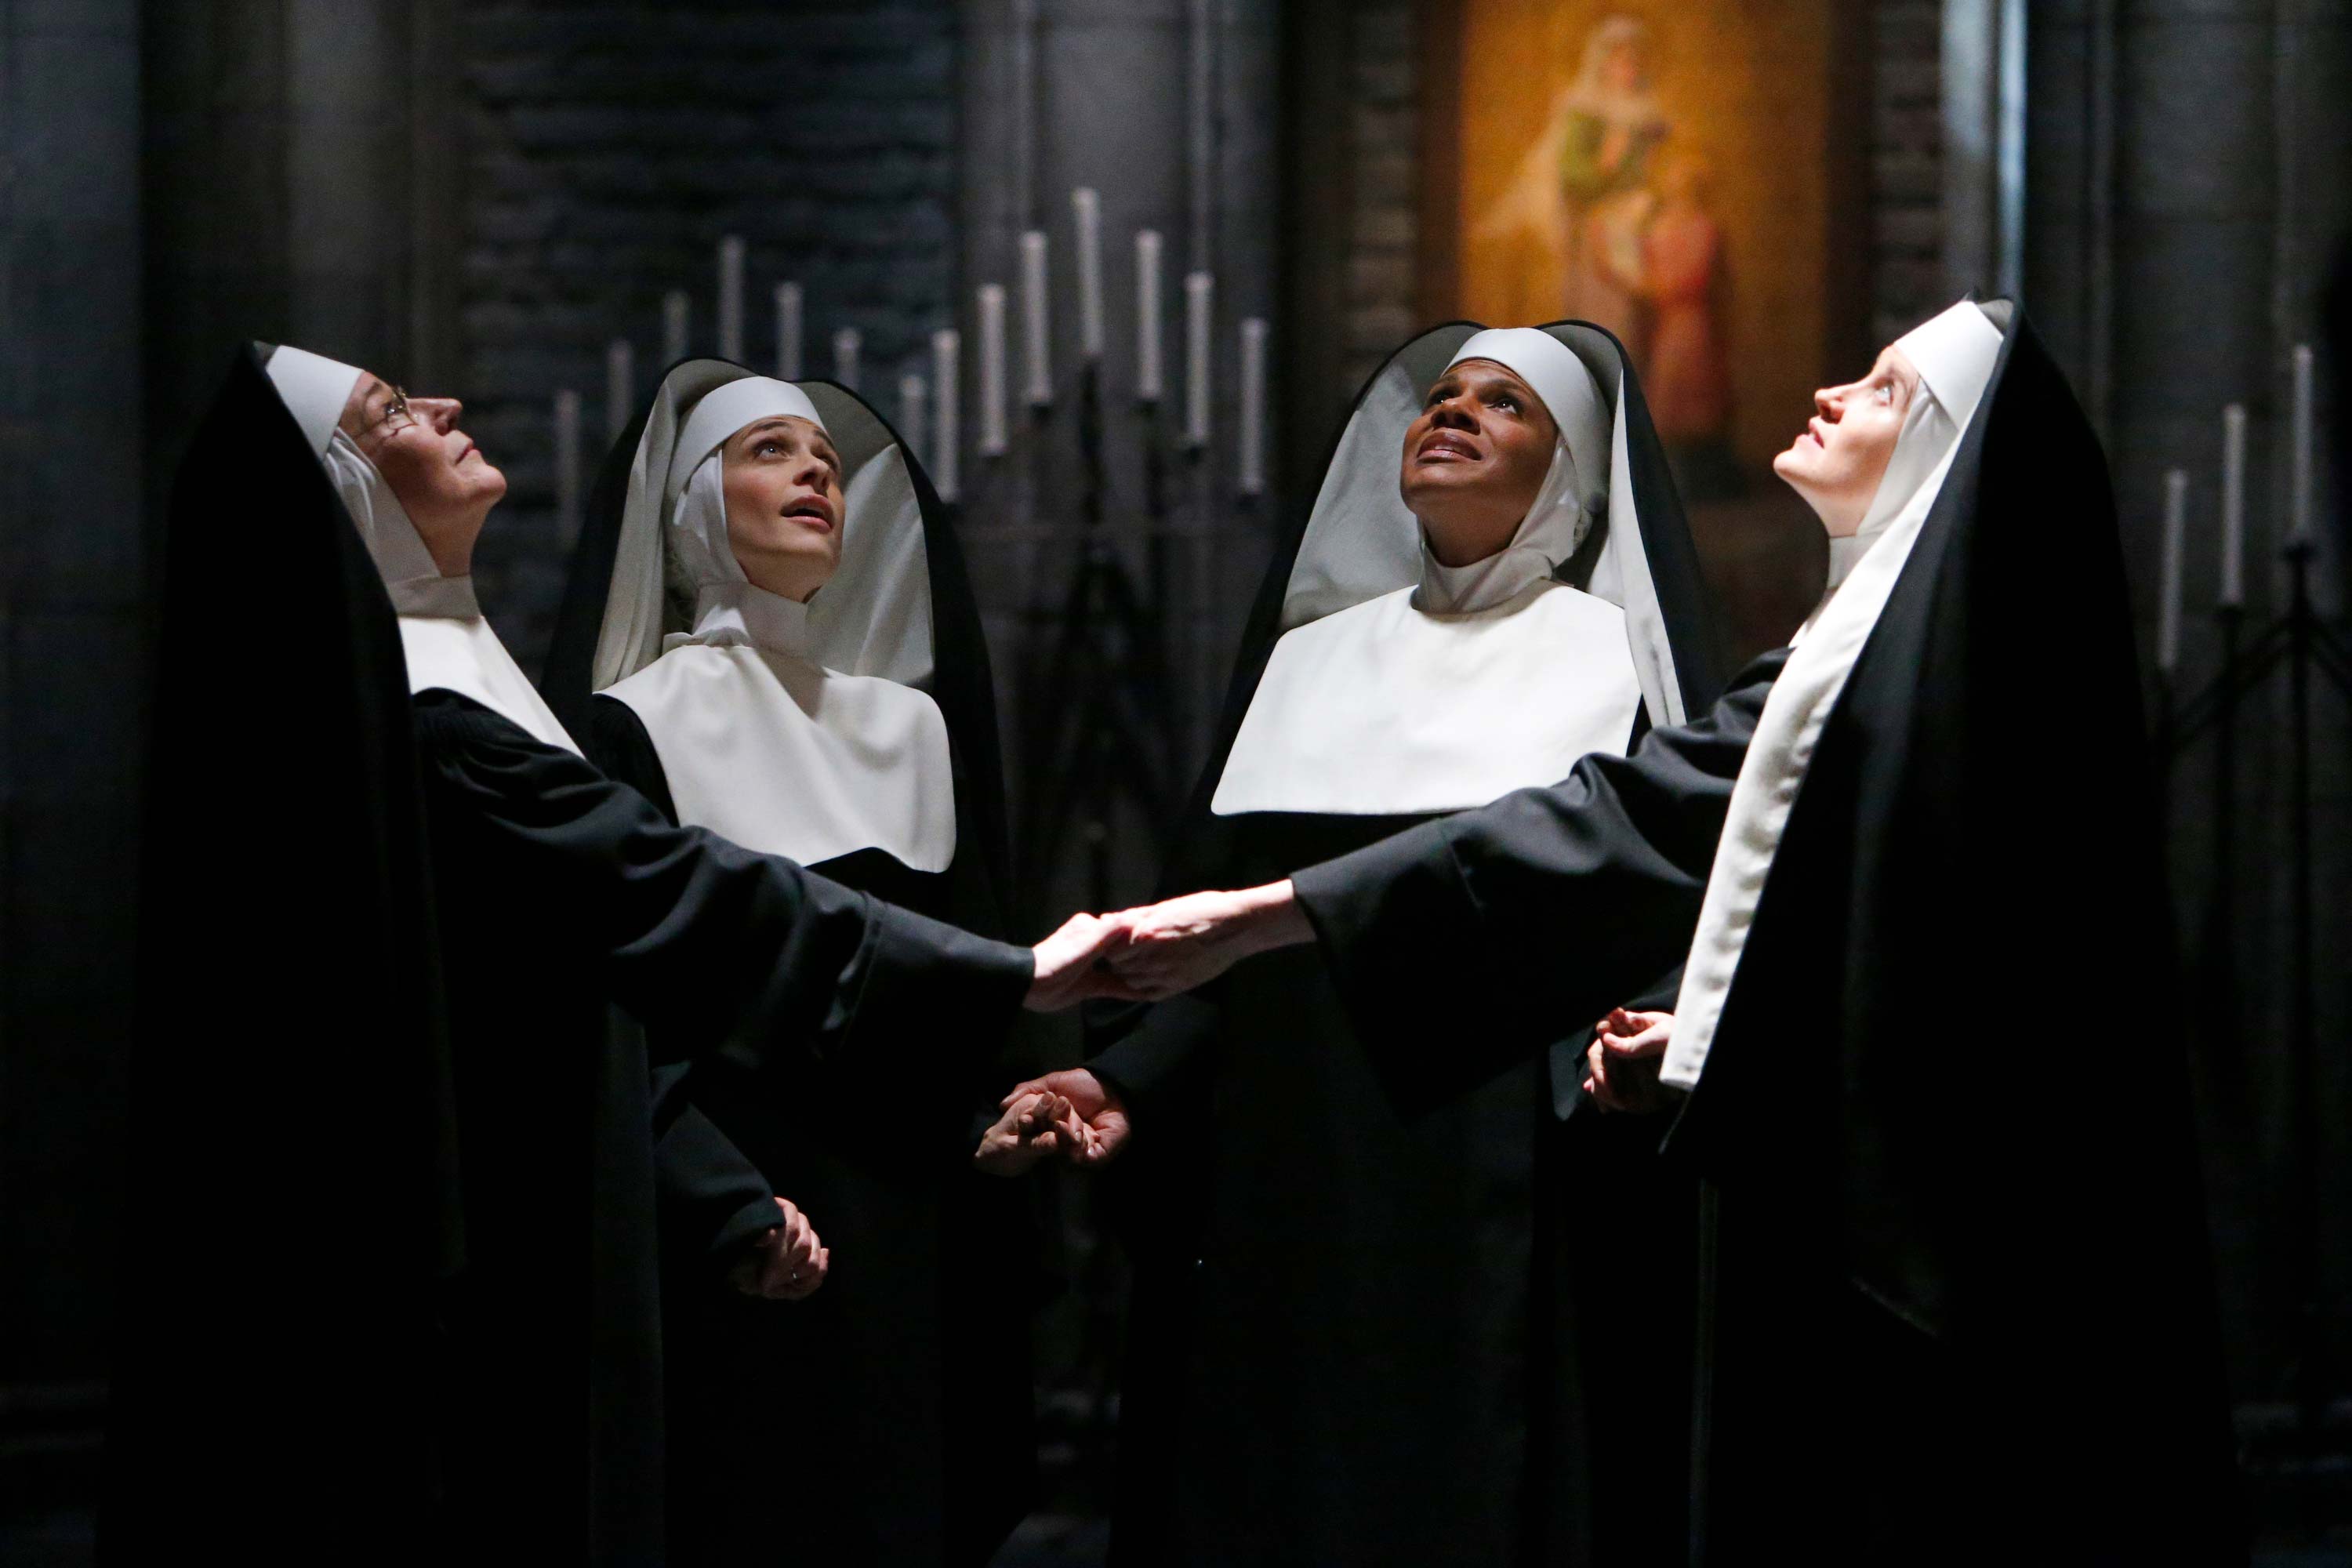 A photo from the 2013 television broadcast of The Sound of Music.